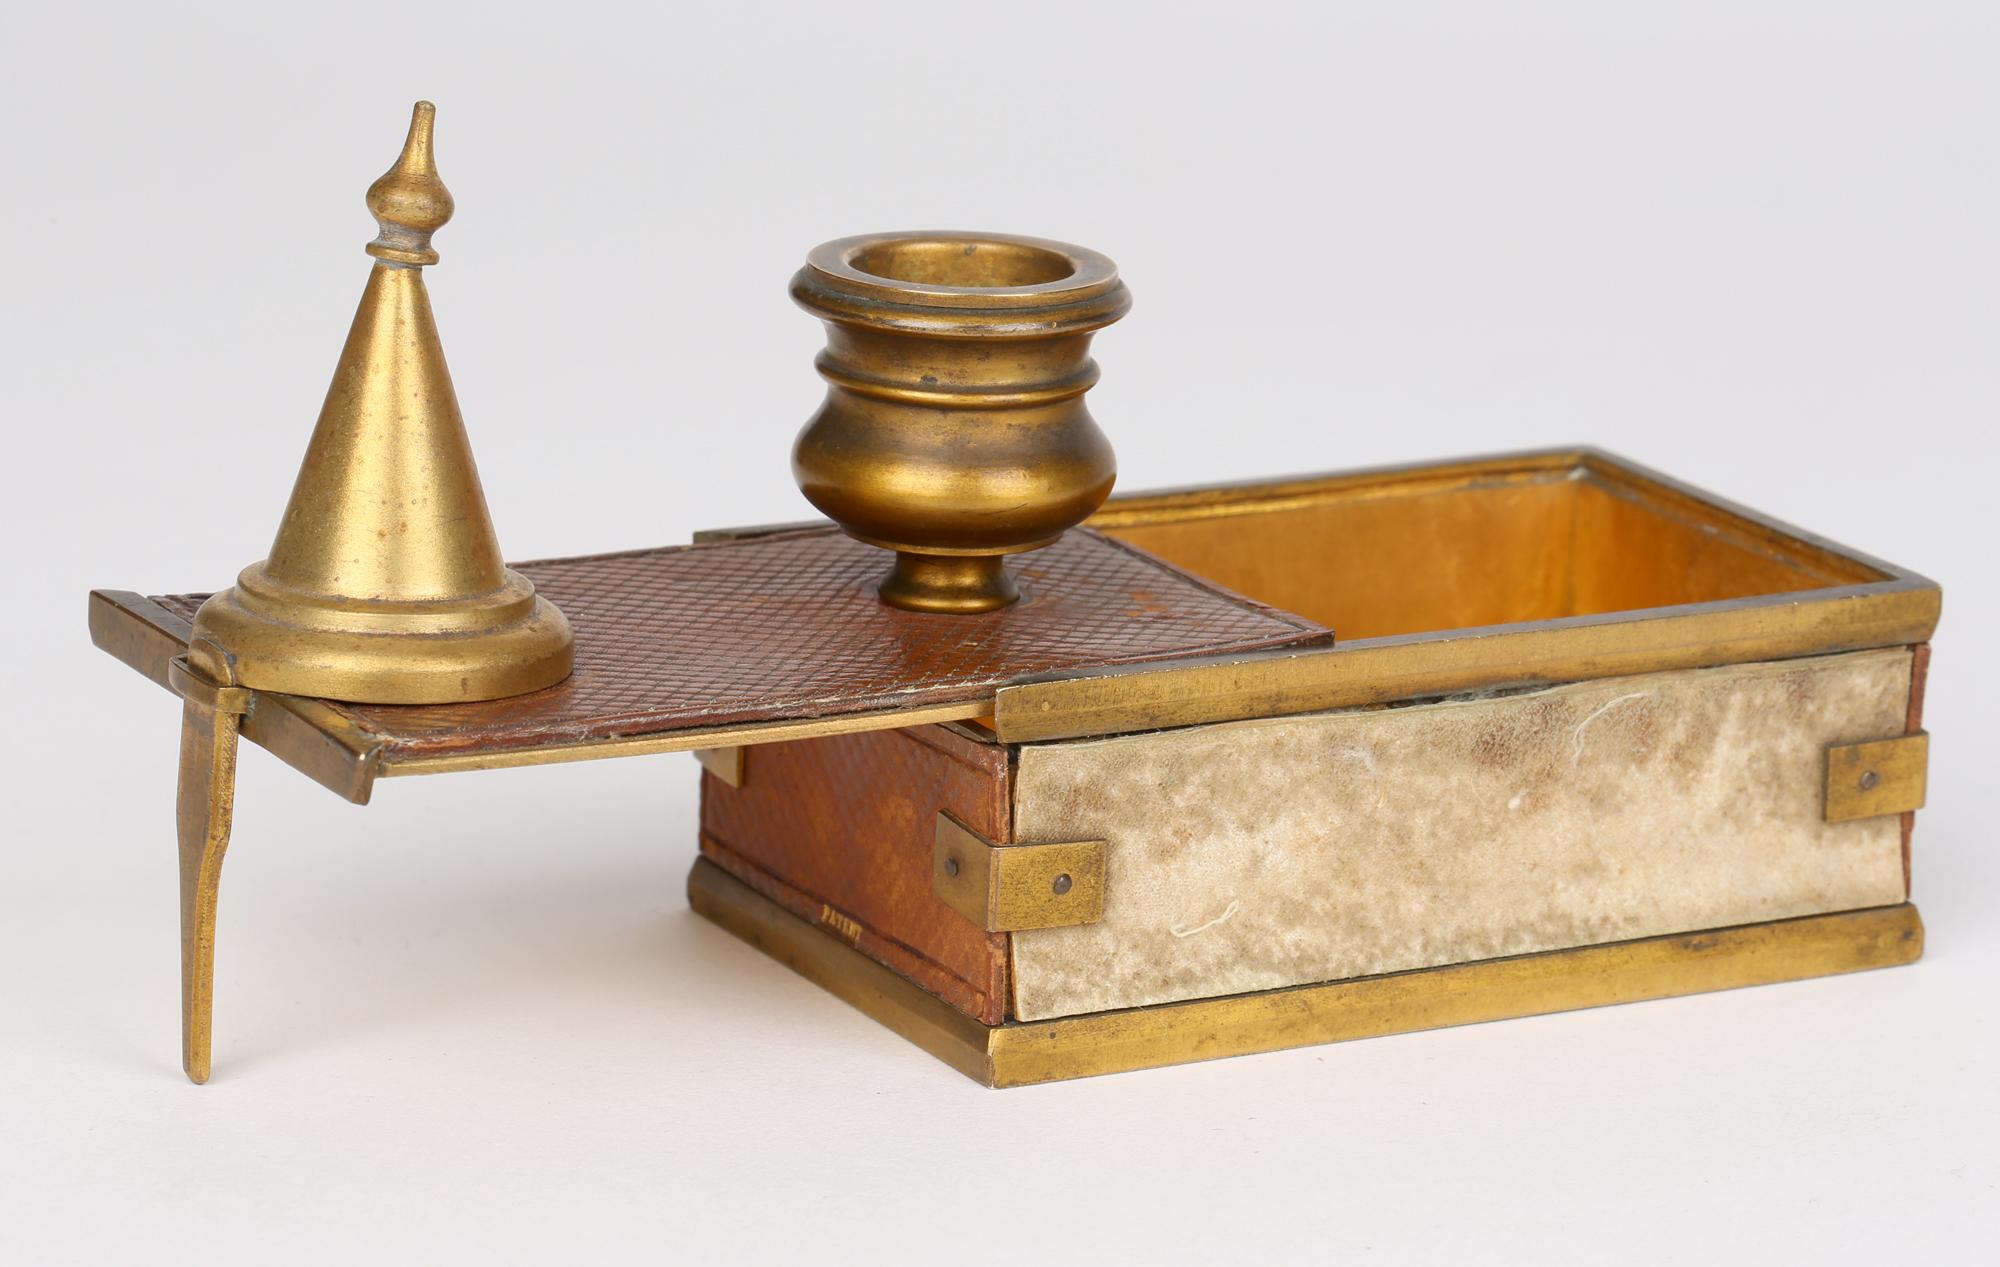 A rare and unusual antique Late Georgian or Regency gilt bronze travelling candle stick with match holder/striker and with a snuffer dating from around 1830. The candlestick is mounted on a gilt bronze rectangular shaped box with a sliding cover and